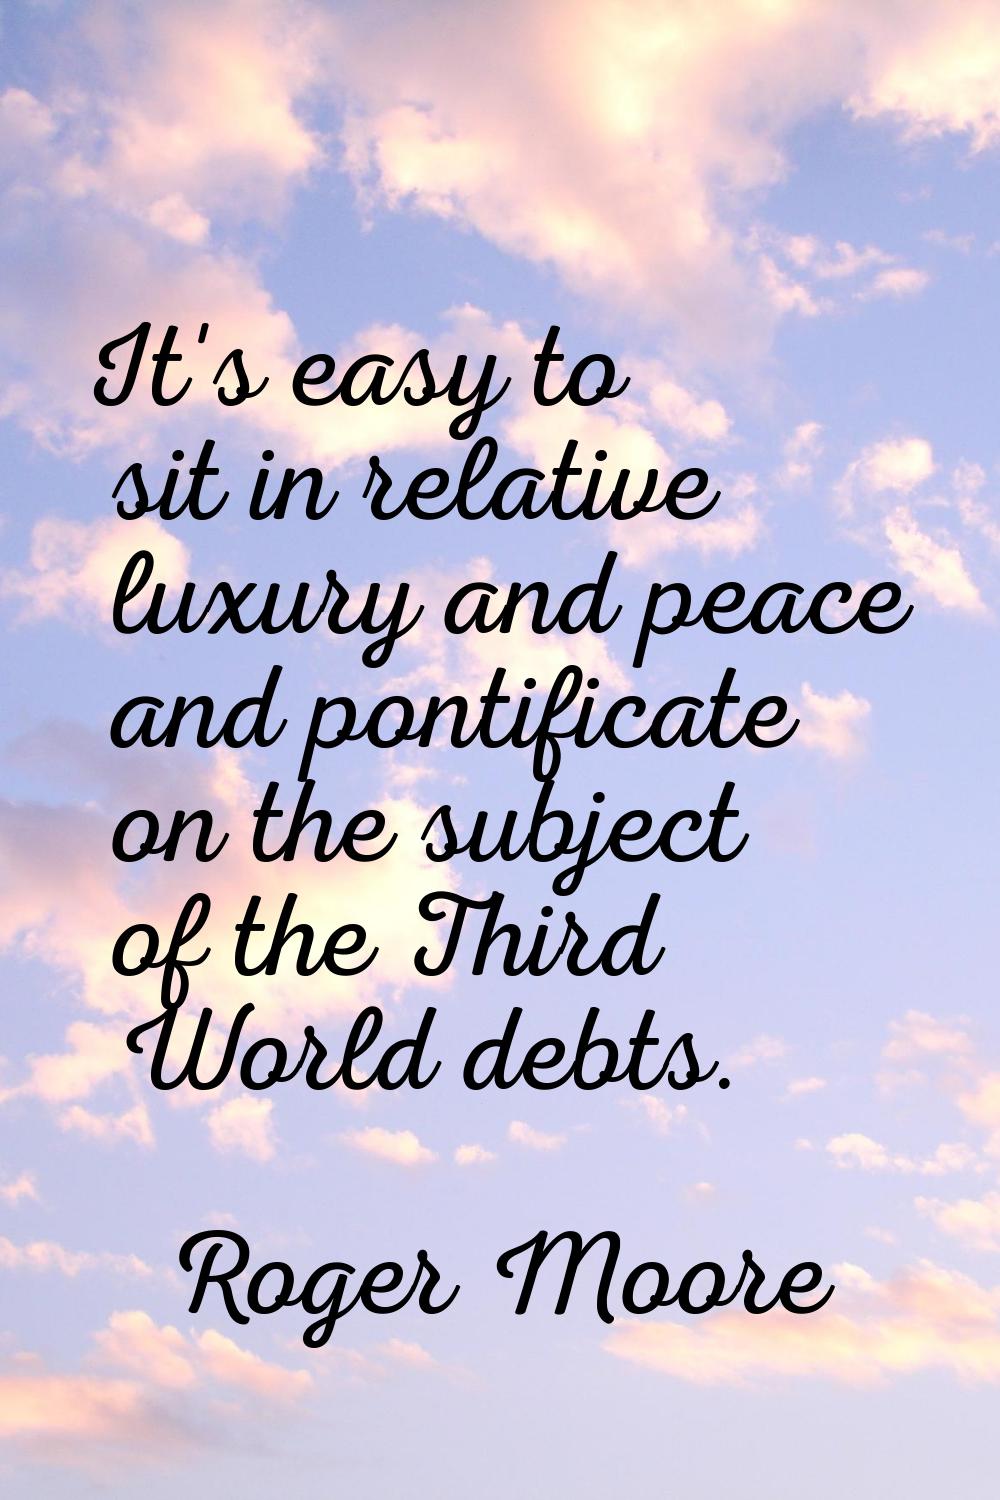 It's easy to sit in relative luxury and peace and pontificate on the subject of the Third World deb